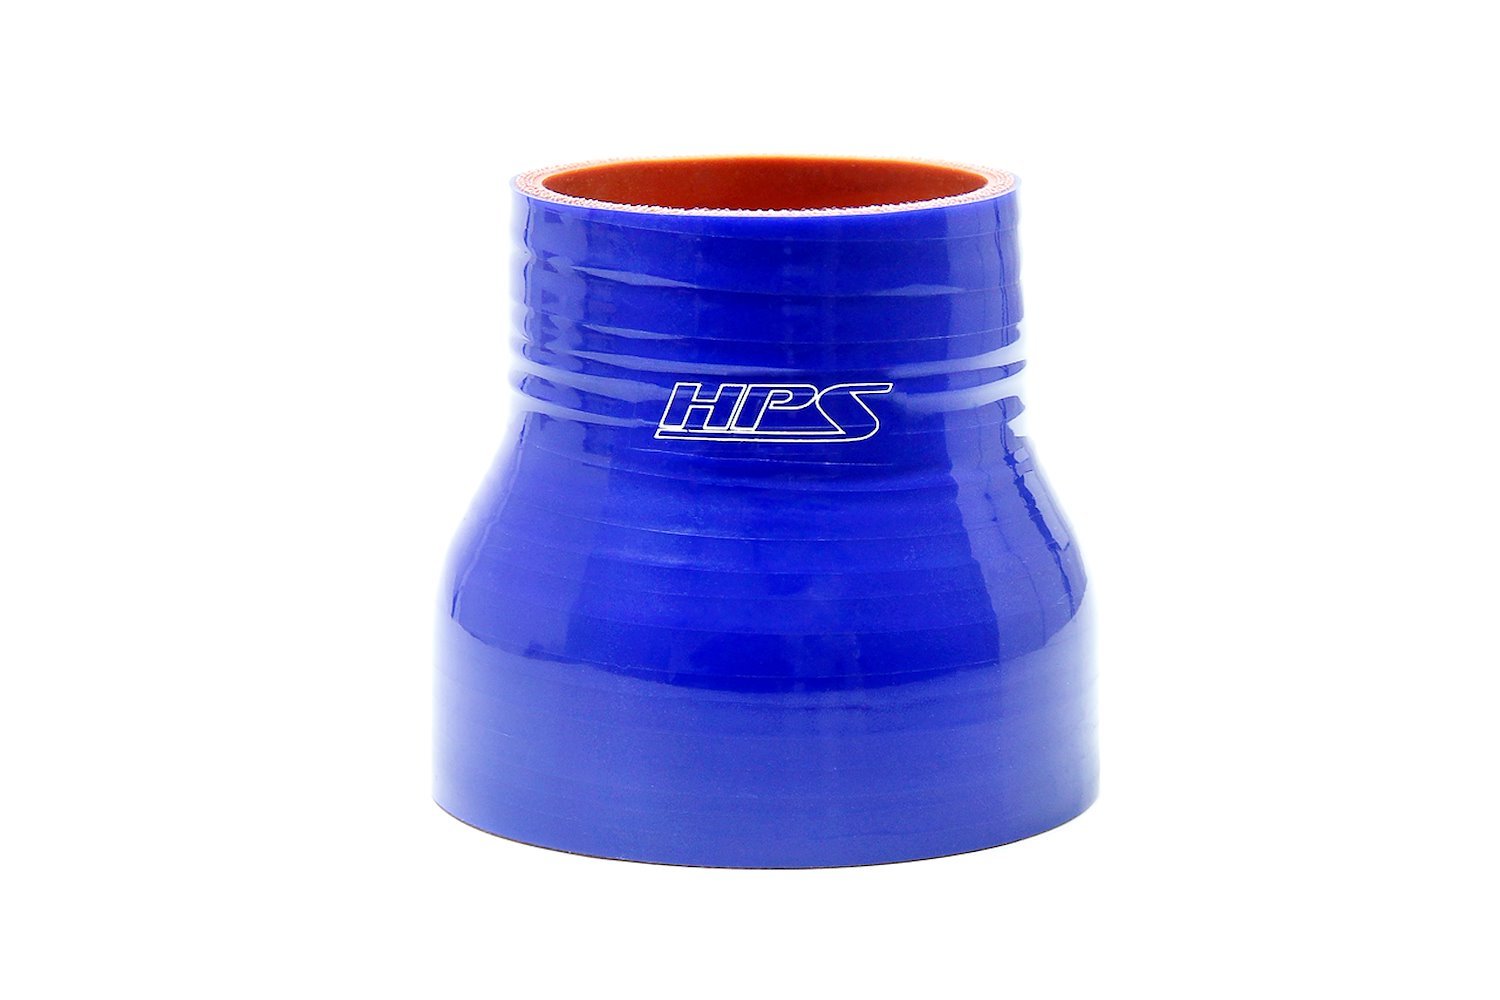 HTSR-212-225-BLUE Silicone Reducer Hose, High-Temp 4-Ply Reinforced, 2-1/8 in. - 2-1/4 in. ID, 3 in. Long, Blue